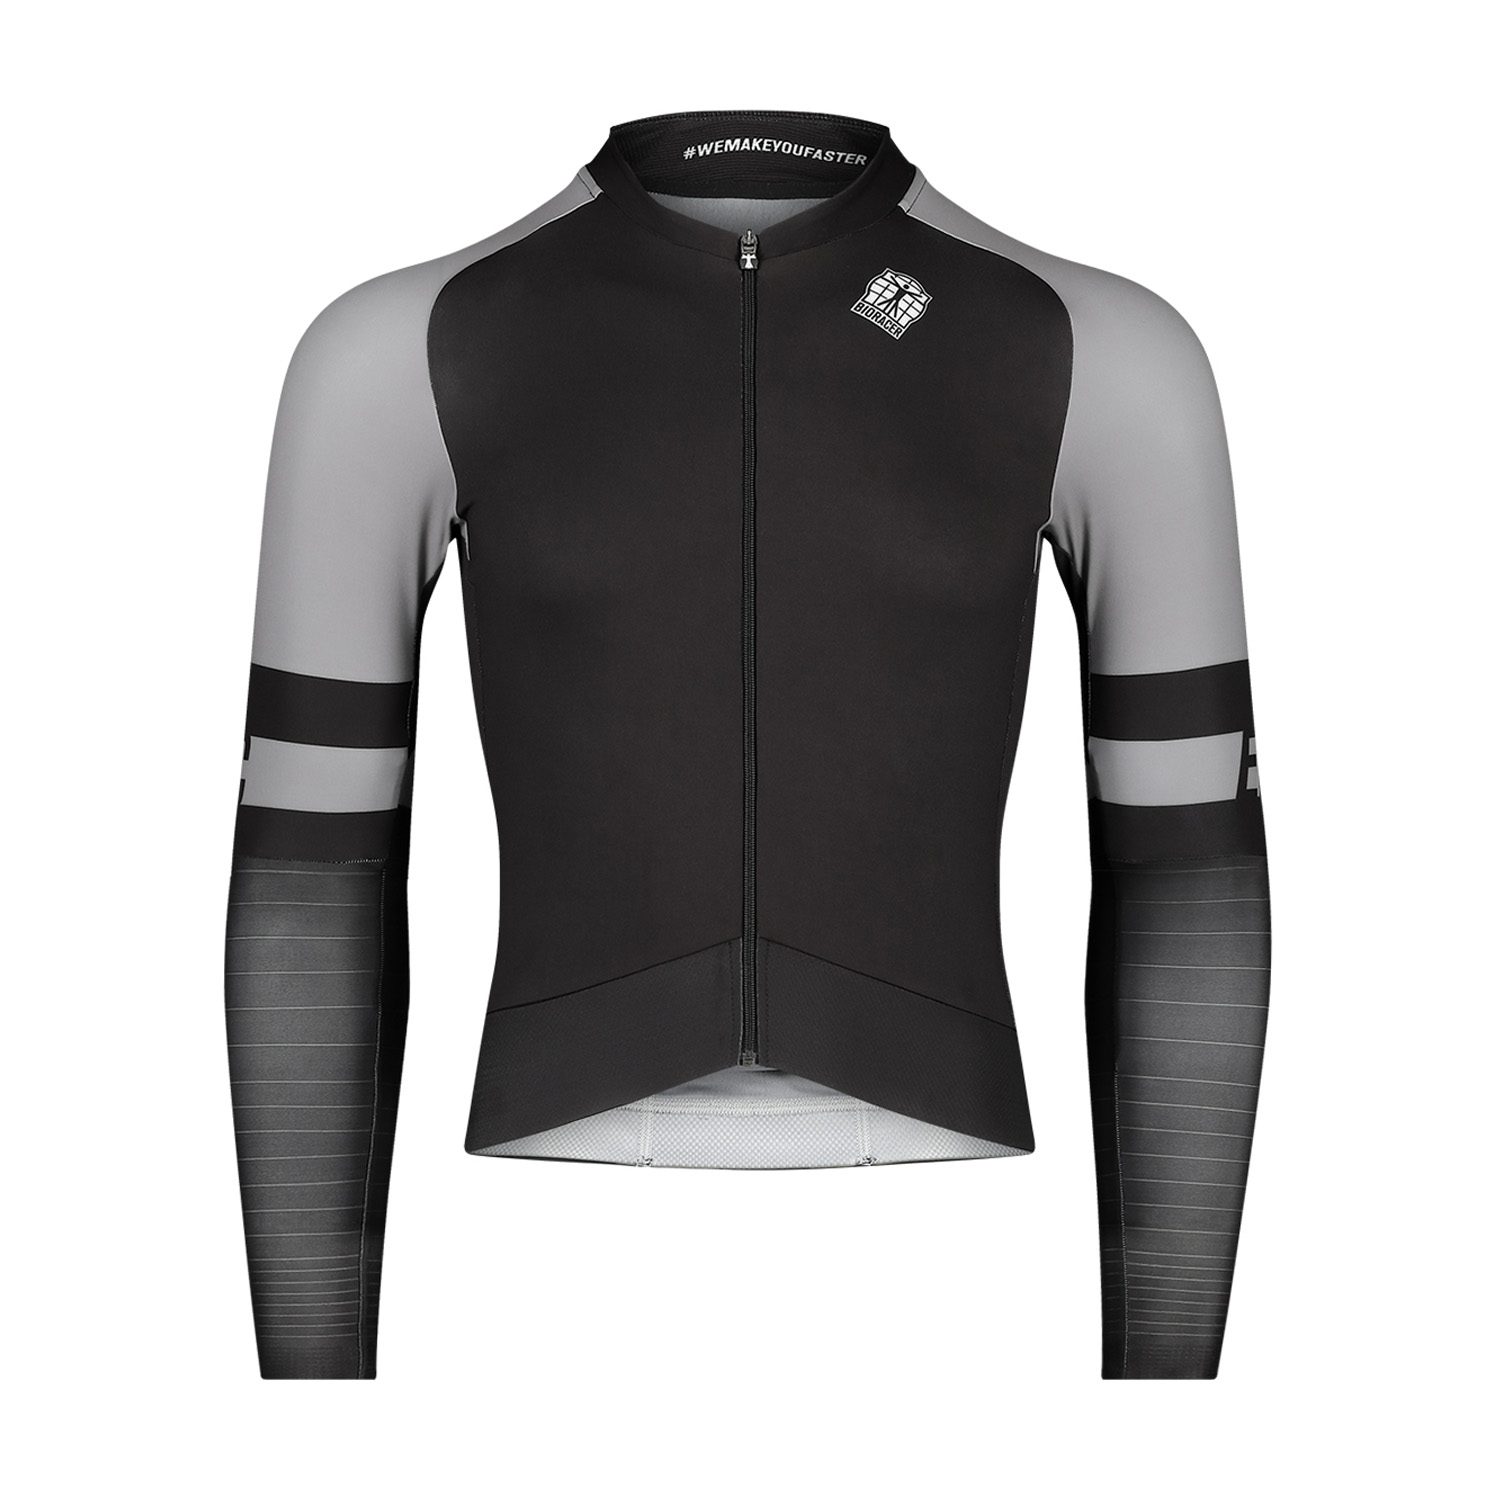 EPIC LONG SLEEVE JERSEY